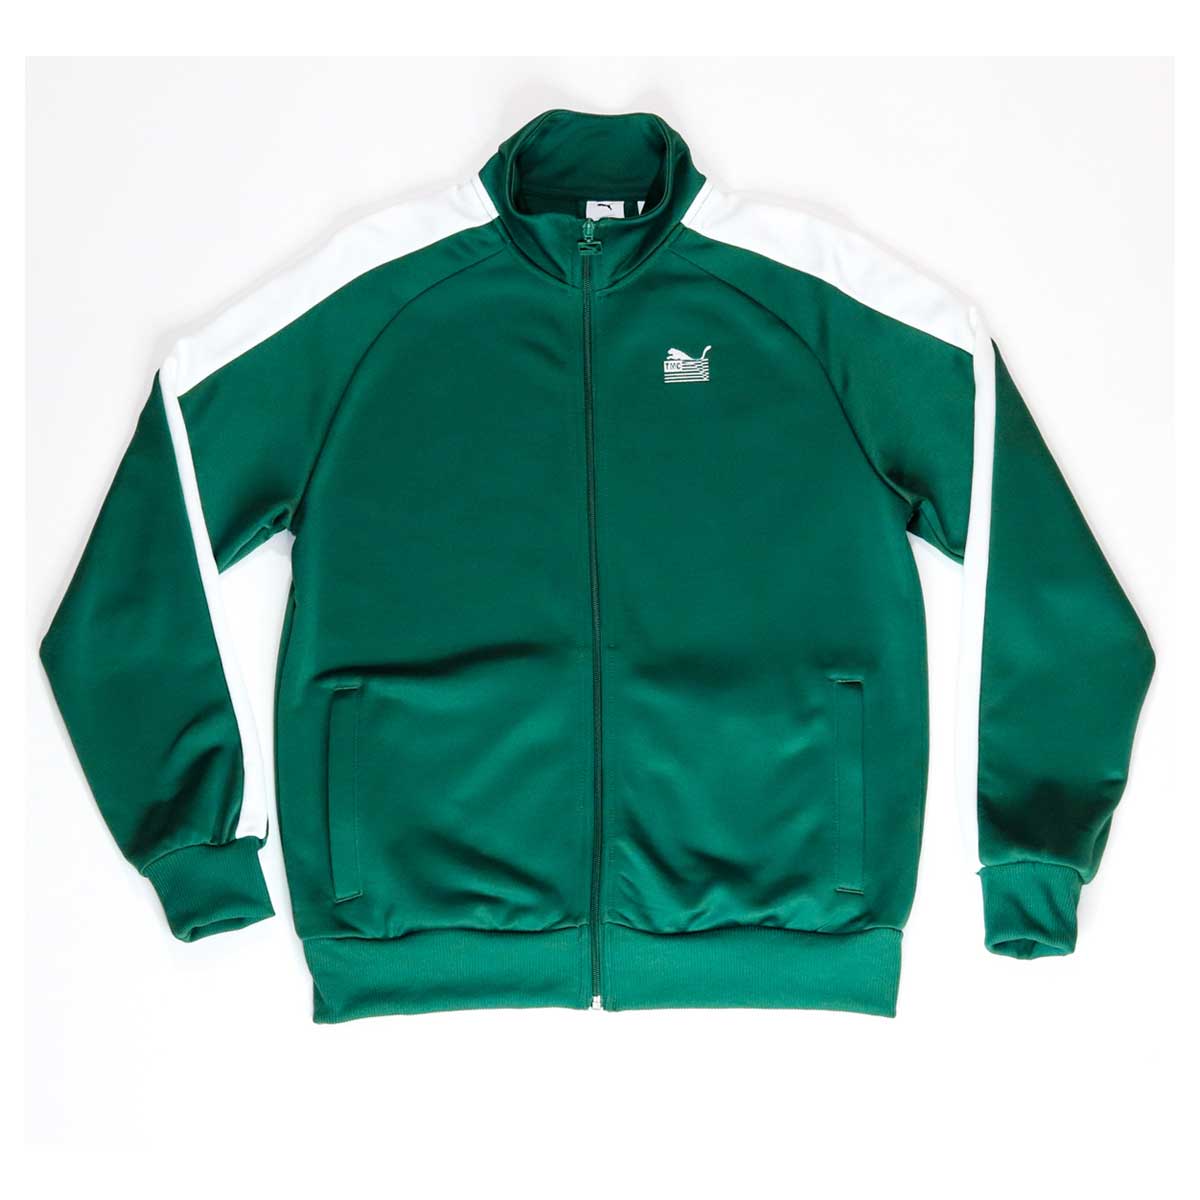 PUMA X TMC T7 Track Suit Top - On The Run Green